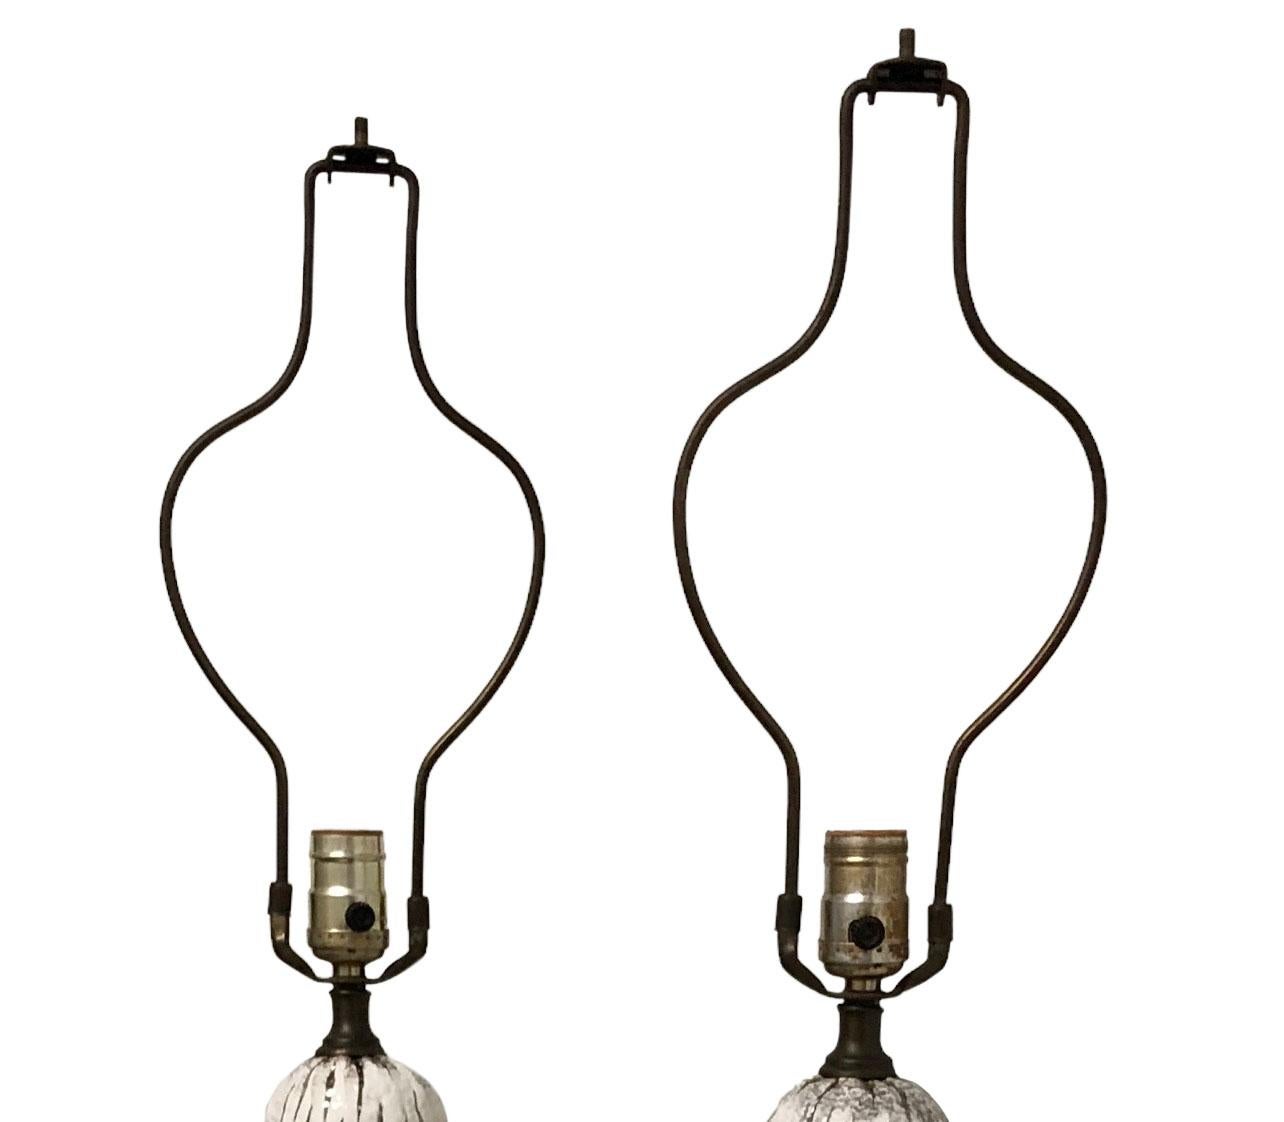 A pair of circa 1950s maybe earlier, Hollywood Regency, white glazed Italian fiancé with silver luster lamps. They have a patina bronze base and original harps. Lamps are in good working condition for the age.